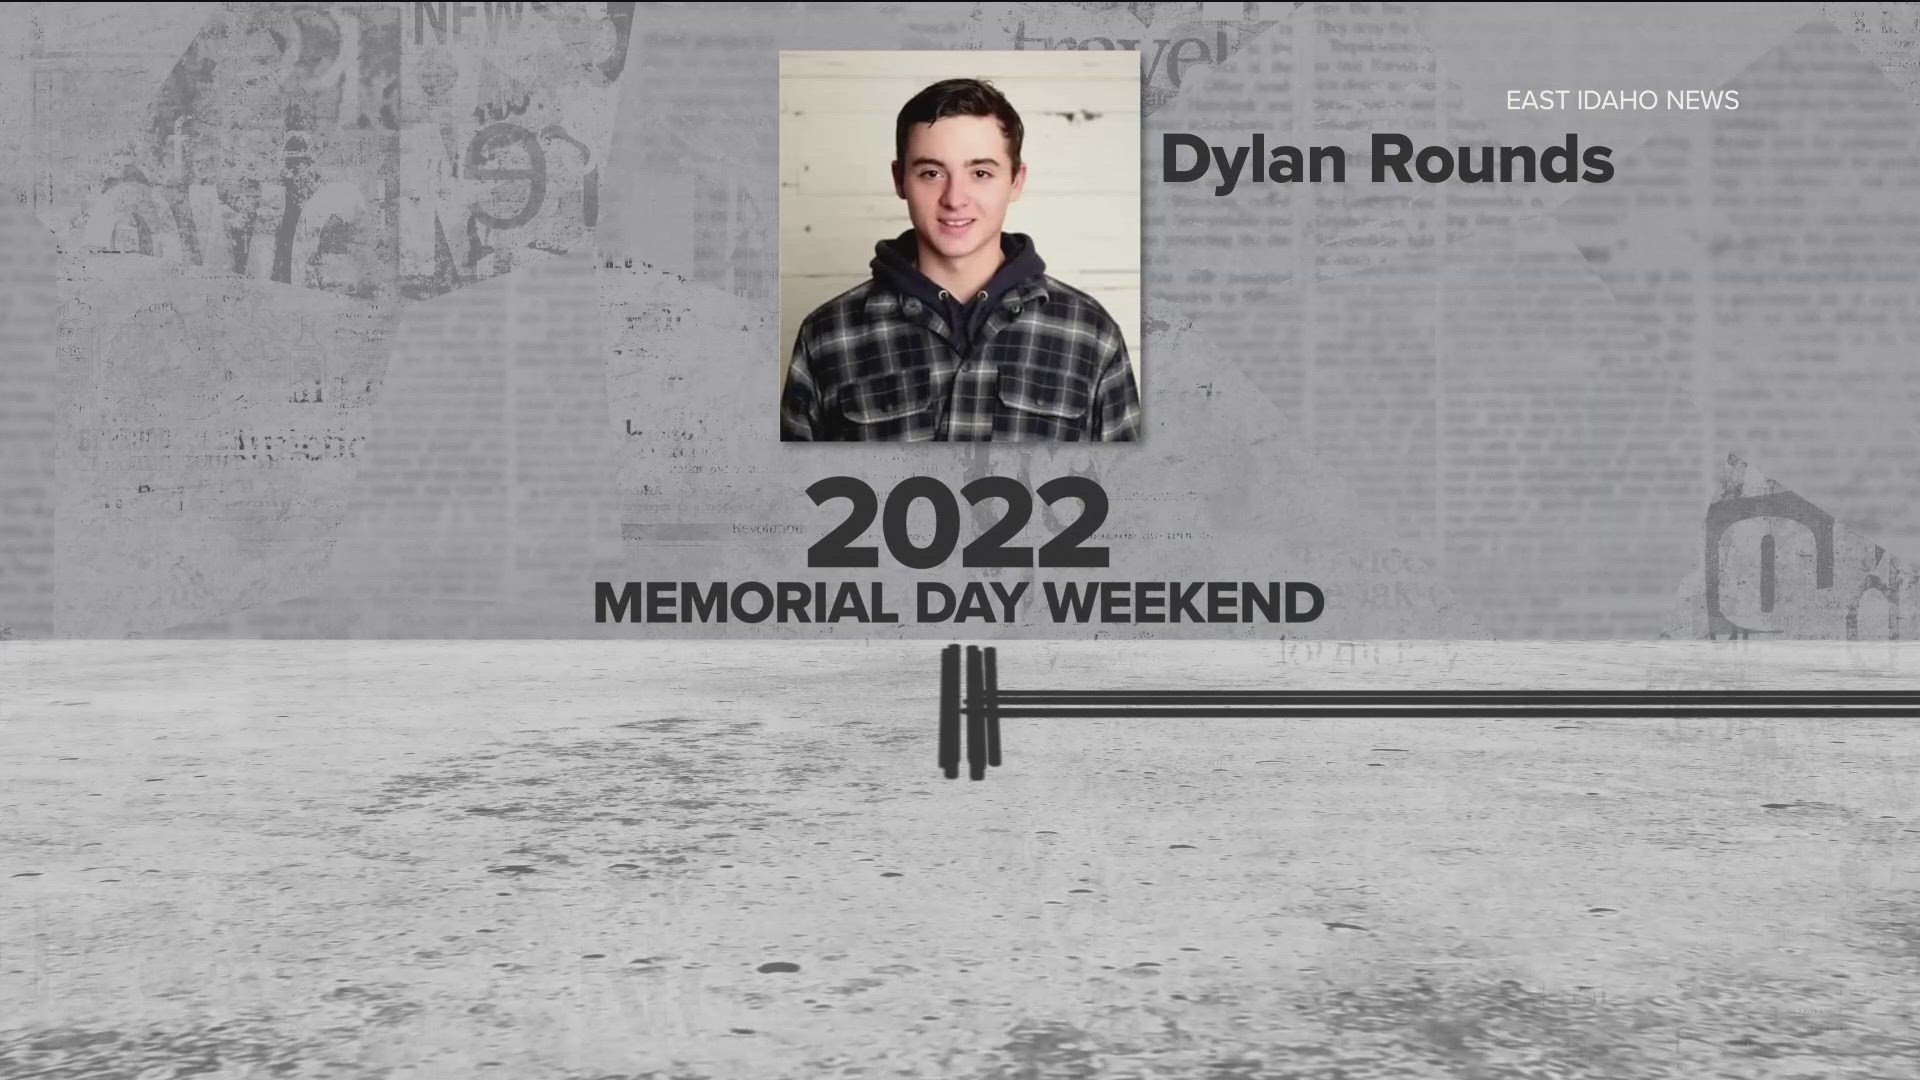 The Box Elder County Sheriff’s Office in Utah announced that a body presumed to be missing 19-year-old Dylan Rounds had been found in Lucin, Utah.